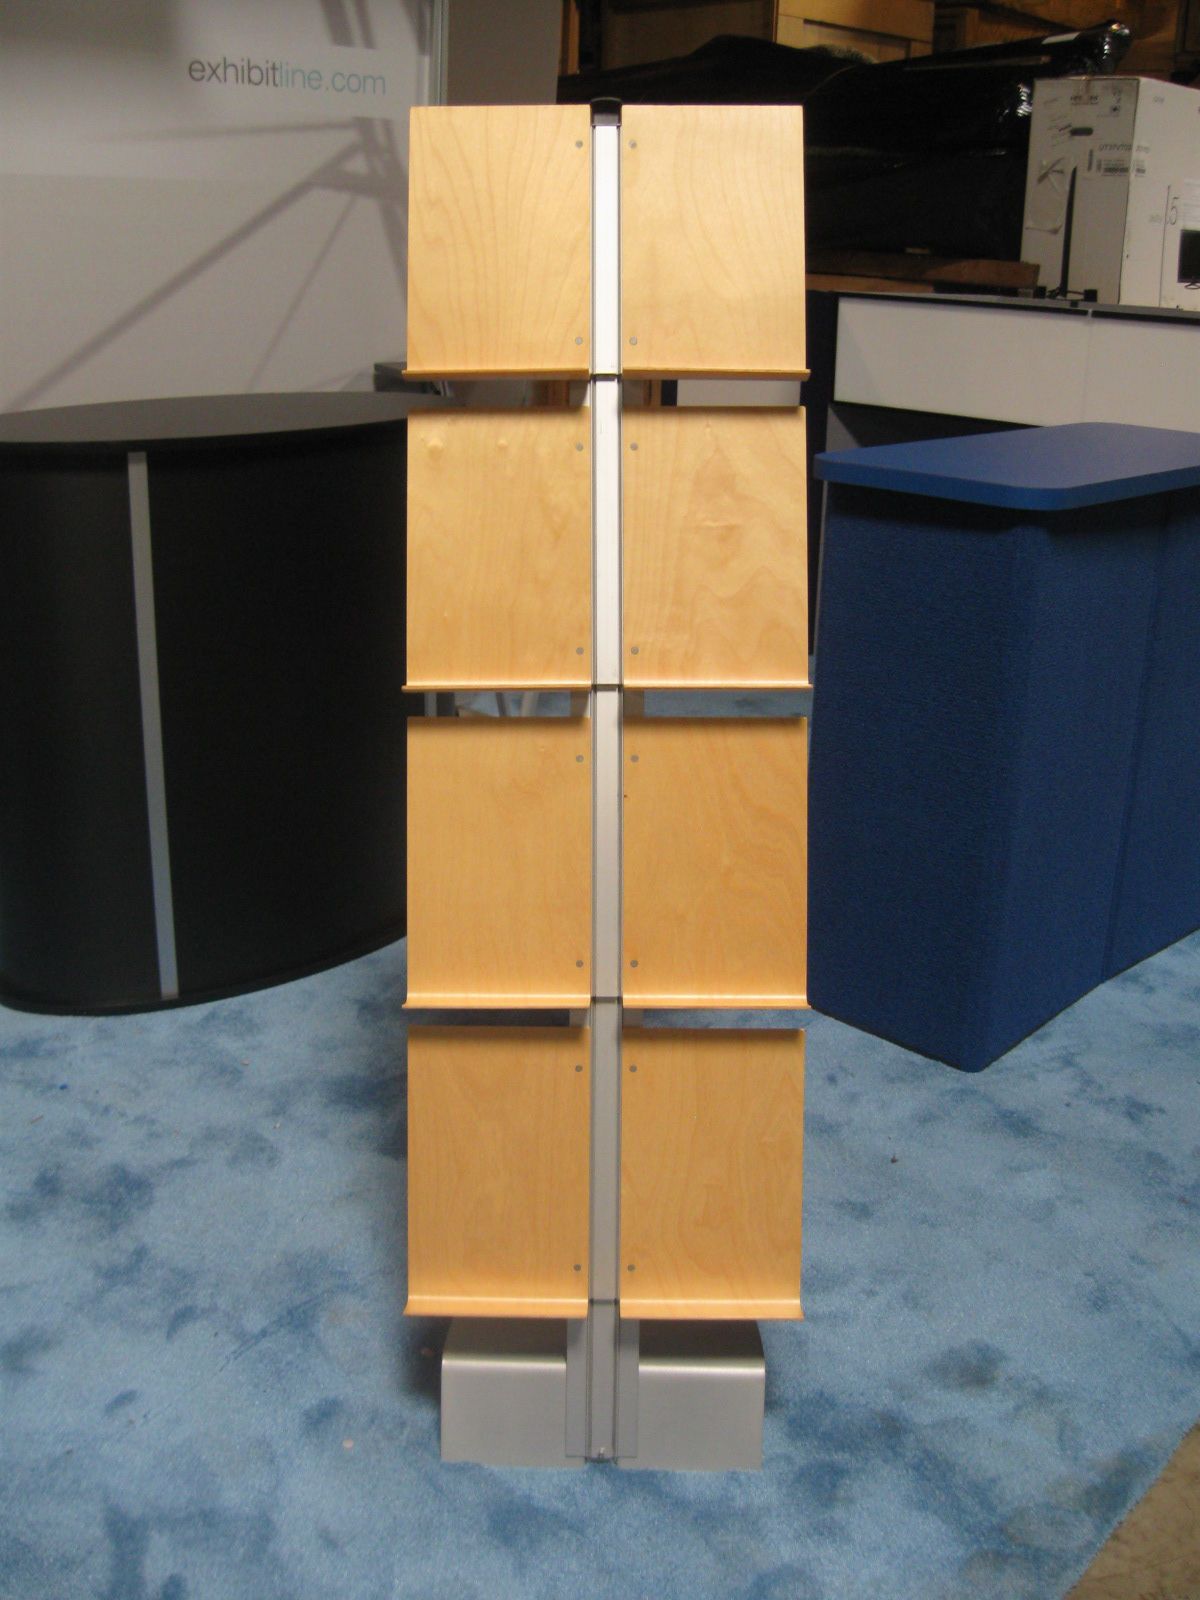 LNT-LR-45 Single Wood Literature Rack (double is pictured) $35